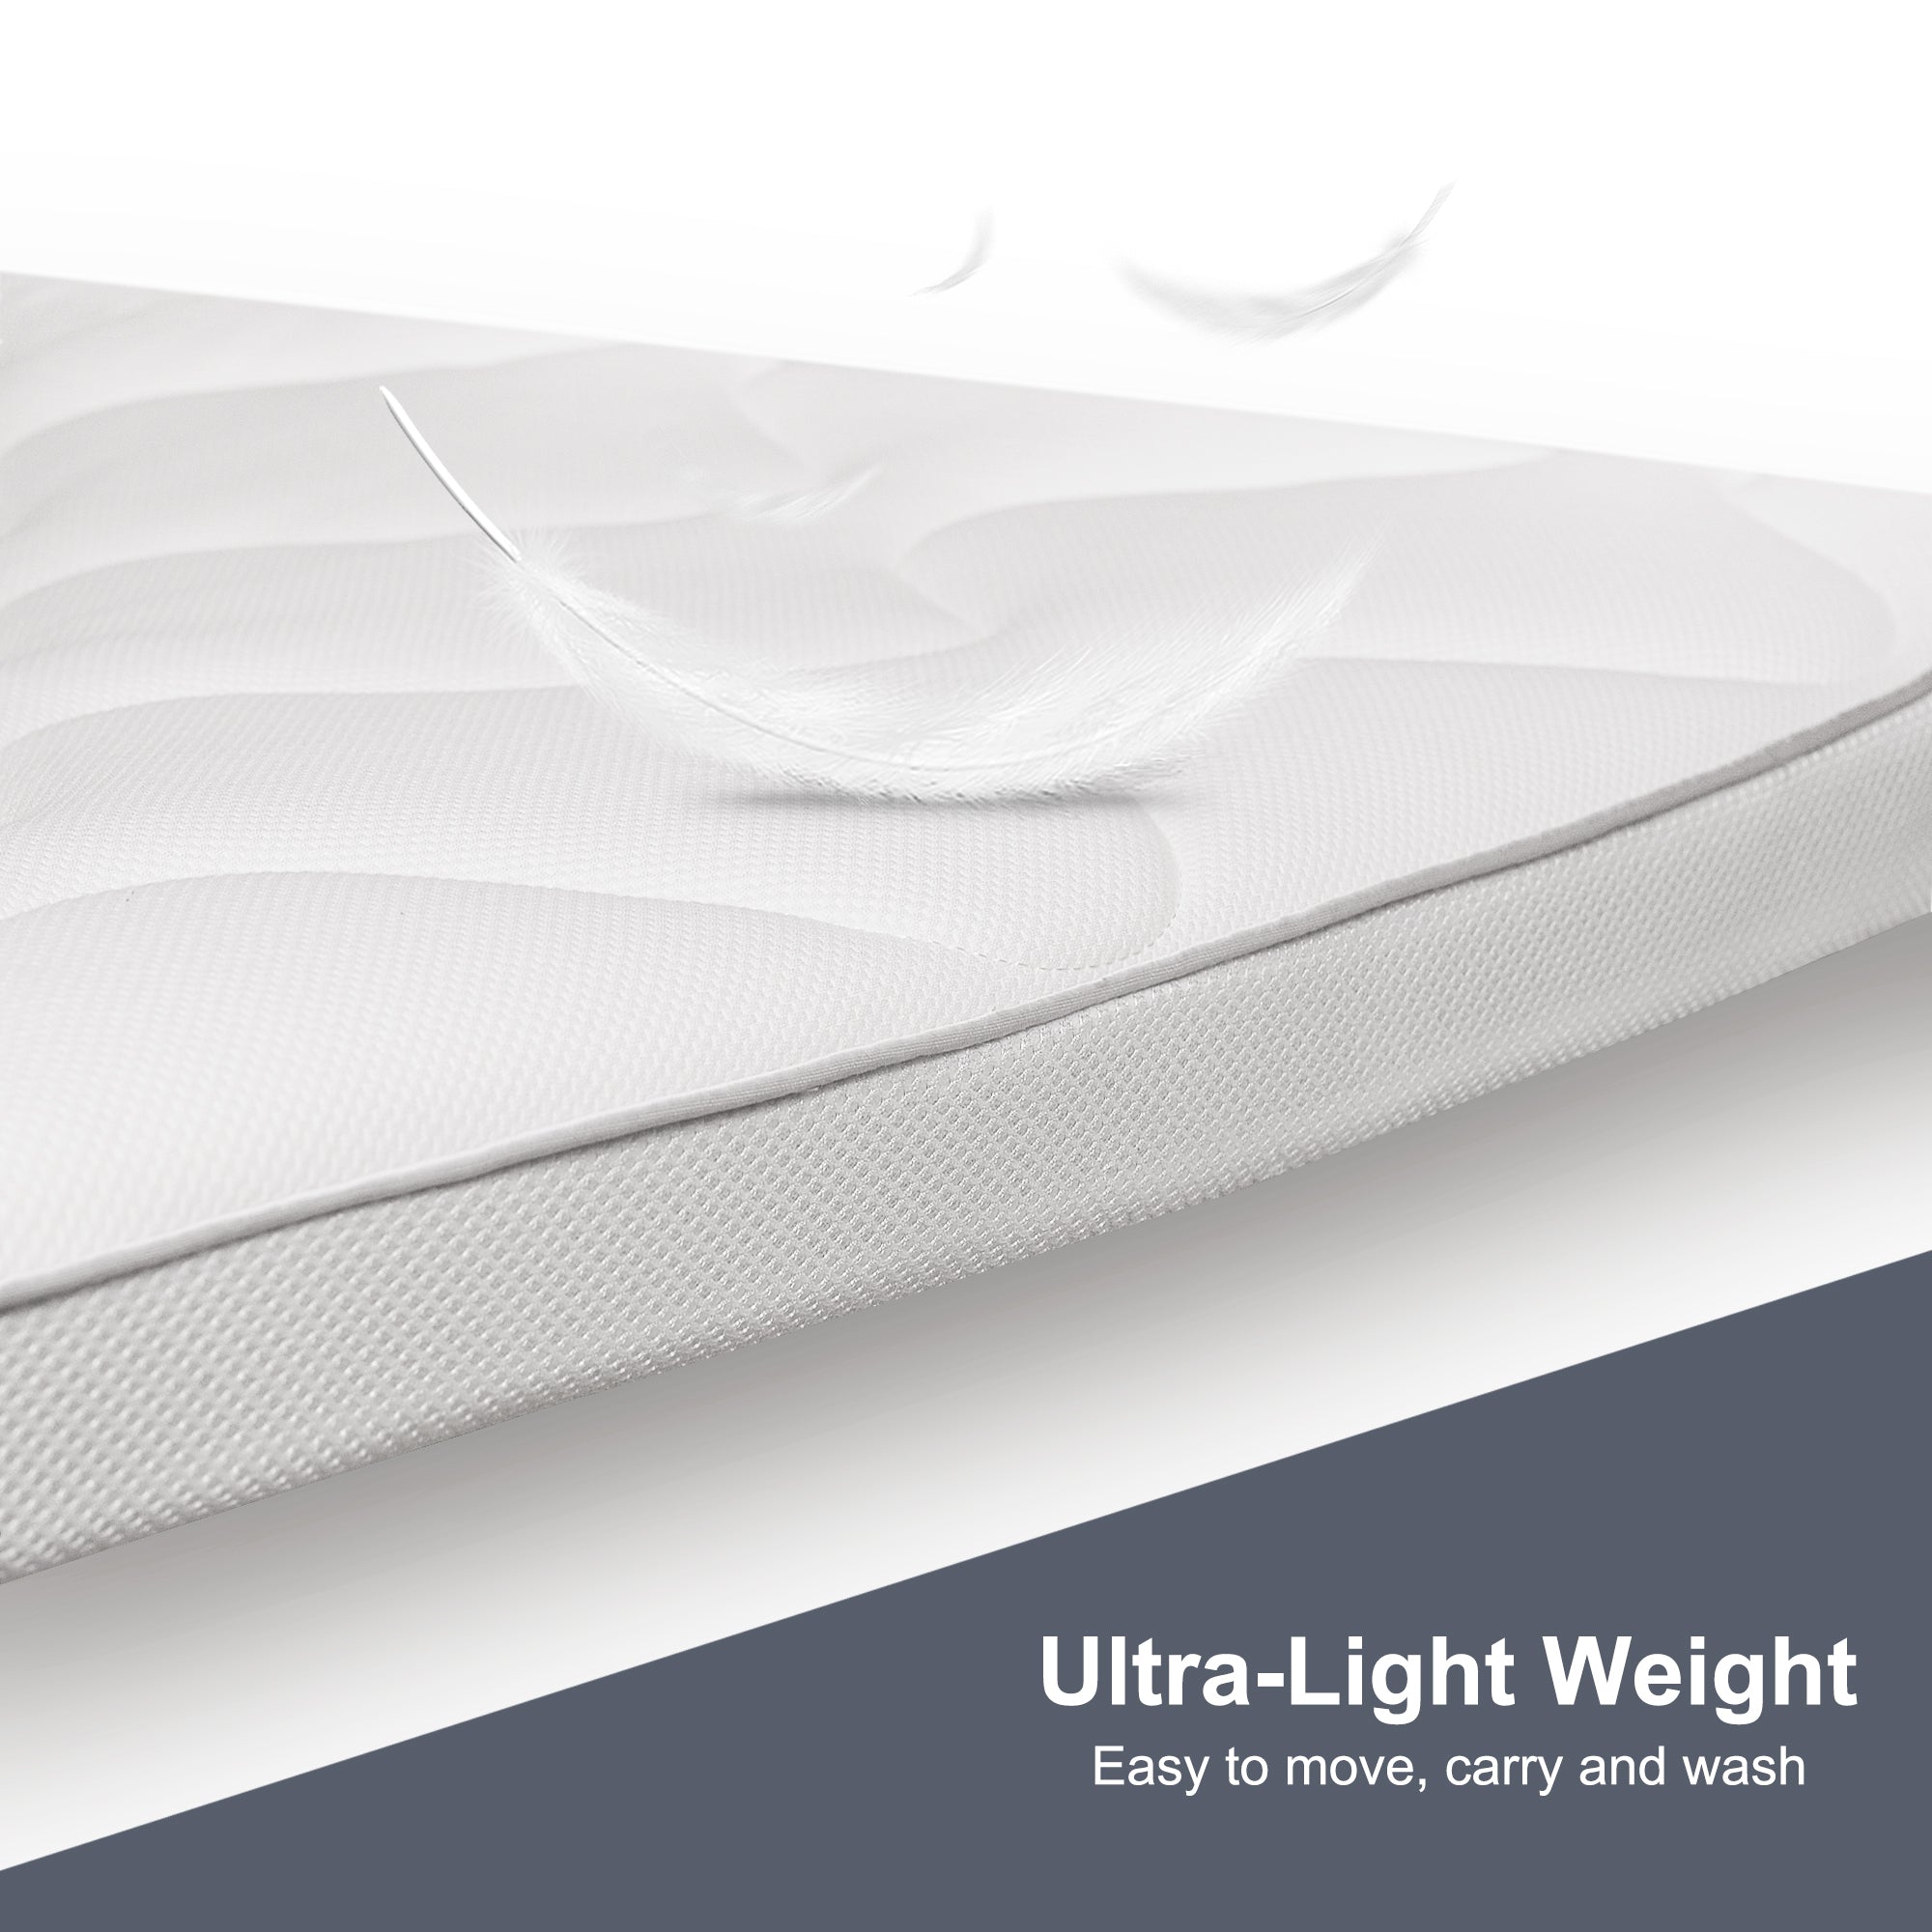 The Smafan Kaiteki 2.75 Inch Air Fiber Mattress Topper was inspired by those who suffer from chronic sleep ailments including painful muscles, stiff joints, and trouble falling and remaining asleep. Designed with an outer cover made of premium polyester and 3 inner cores made of innovative 4D Air Fiber material, the Kaiteki creates the optimal sleep conditions that can help mitigate pain and discomfort.